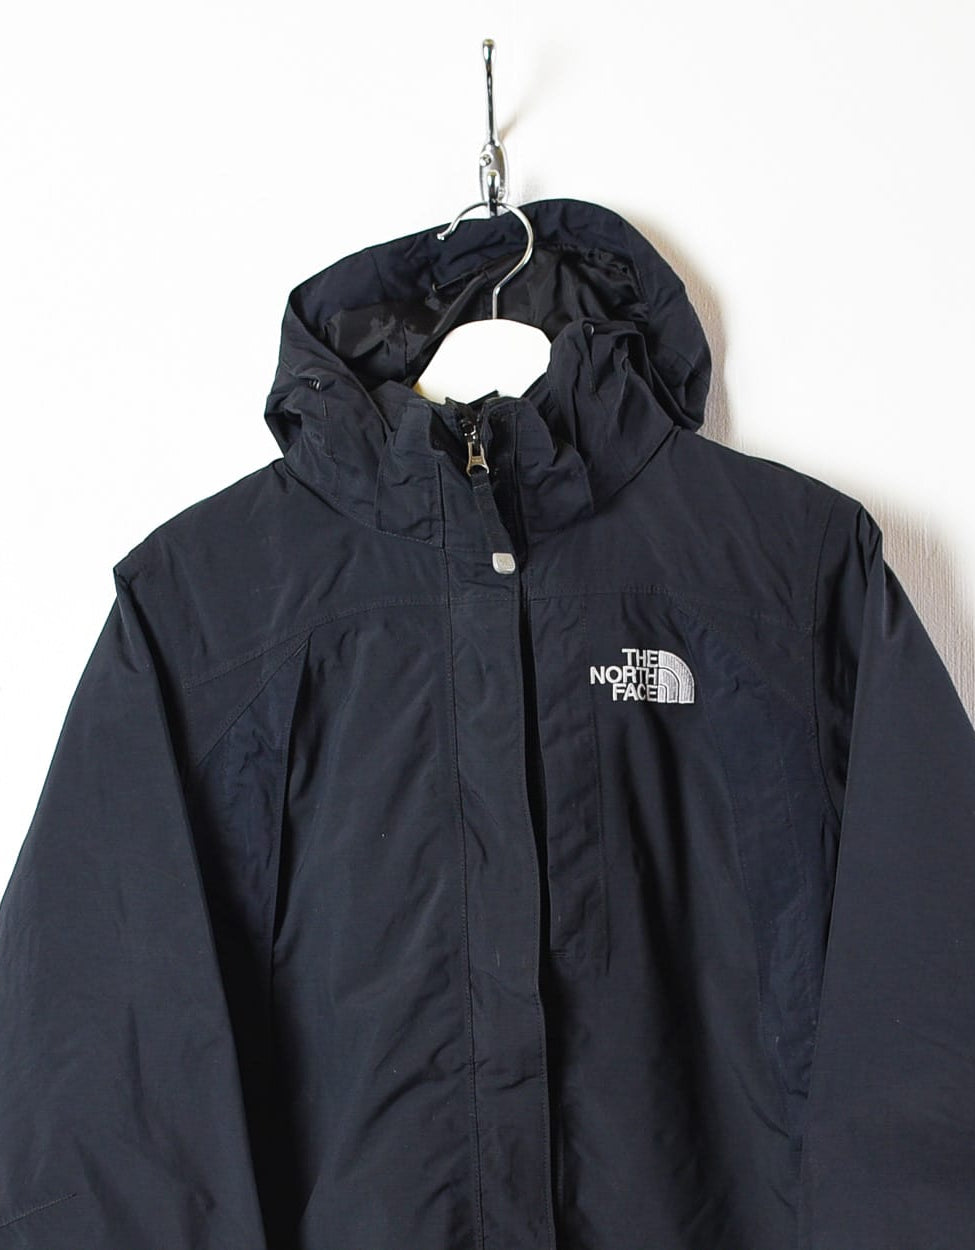 Black The North Face HyVent Hooded Windbreaker Jacket - Small Women's